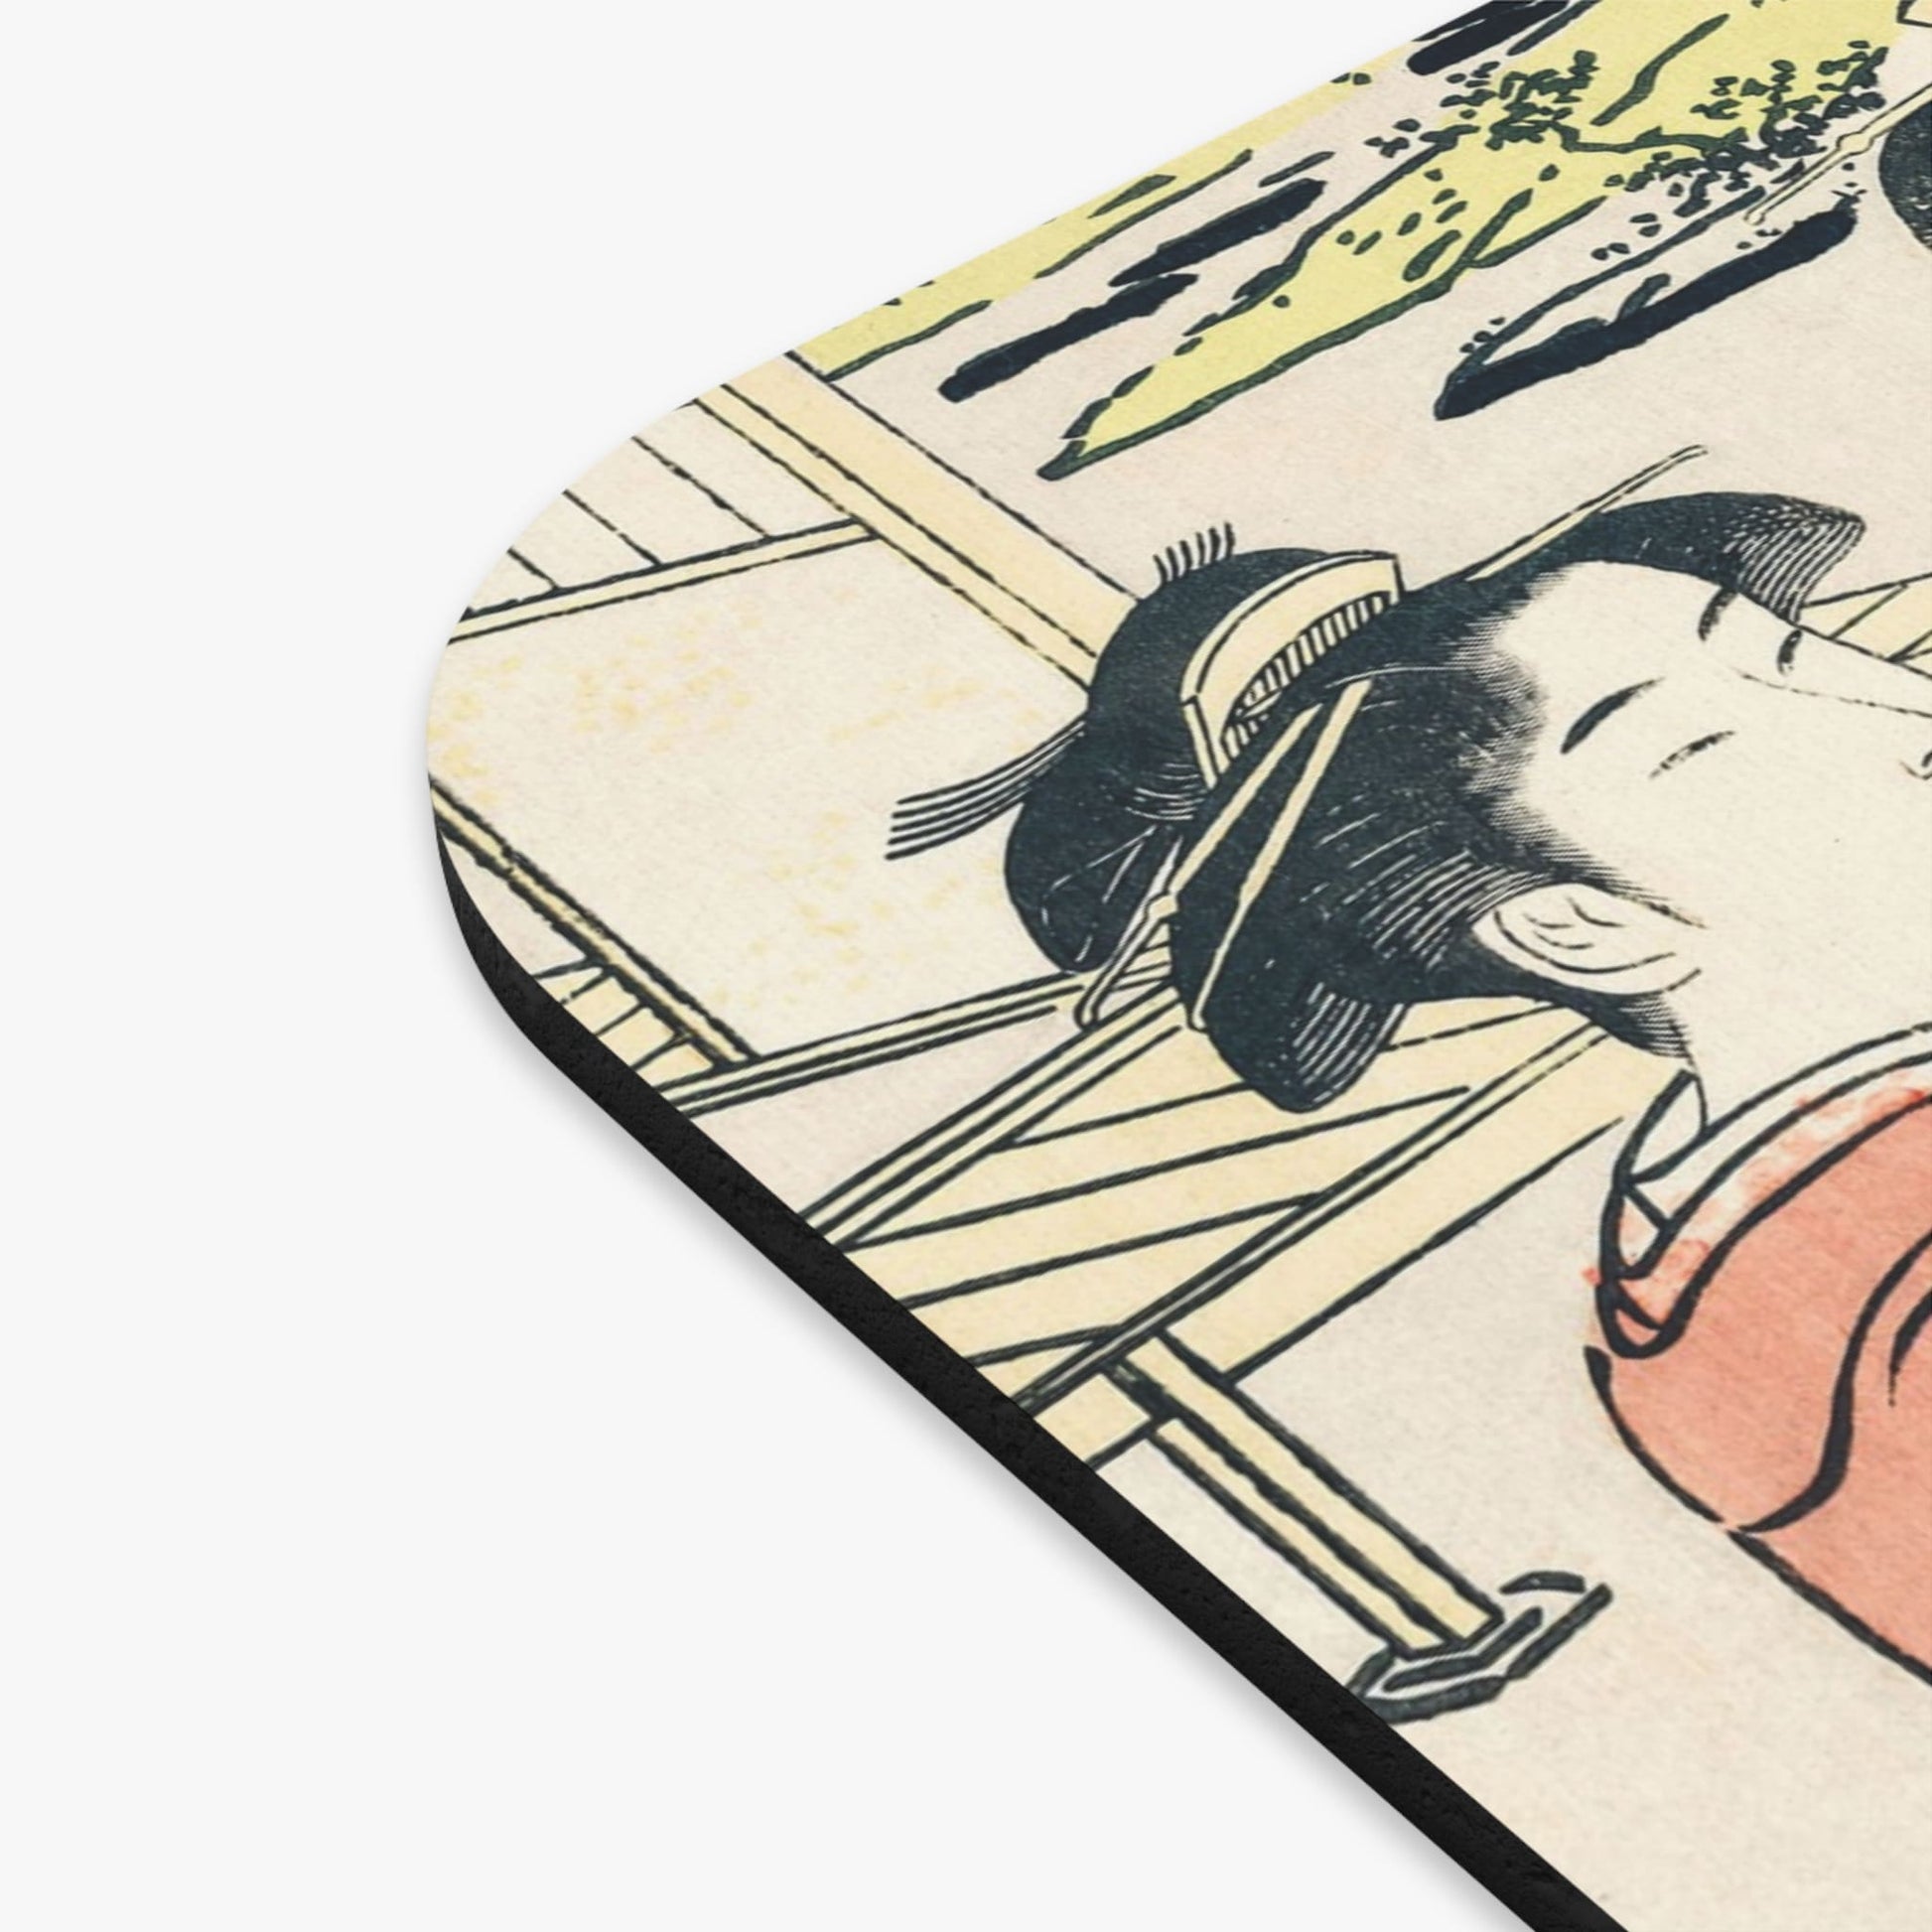 Light Japanese Aesthetic Vintage Mouse Pad Design Close Up